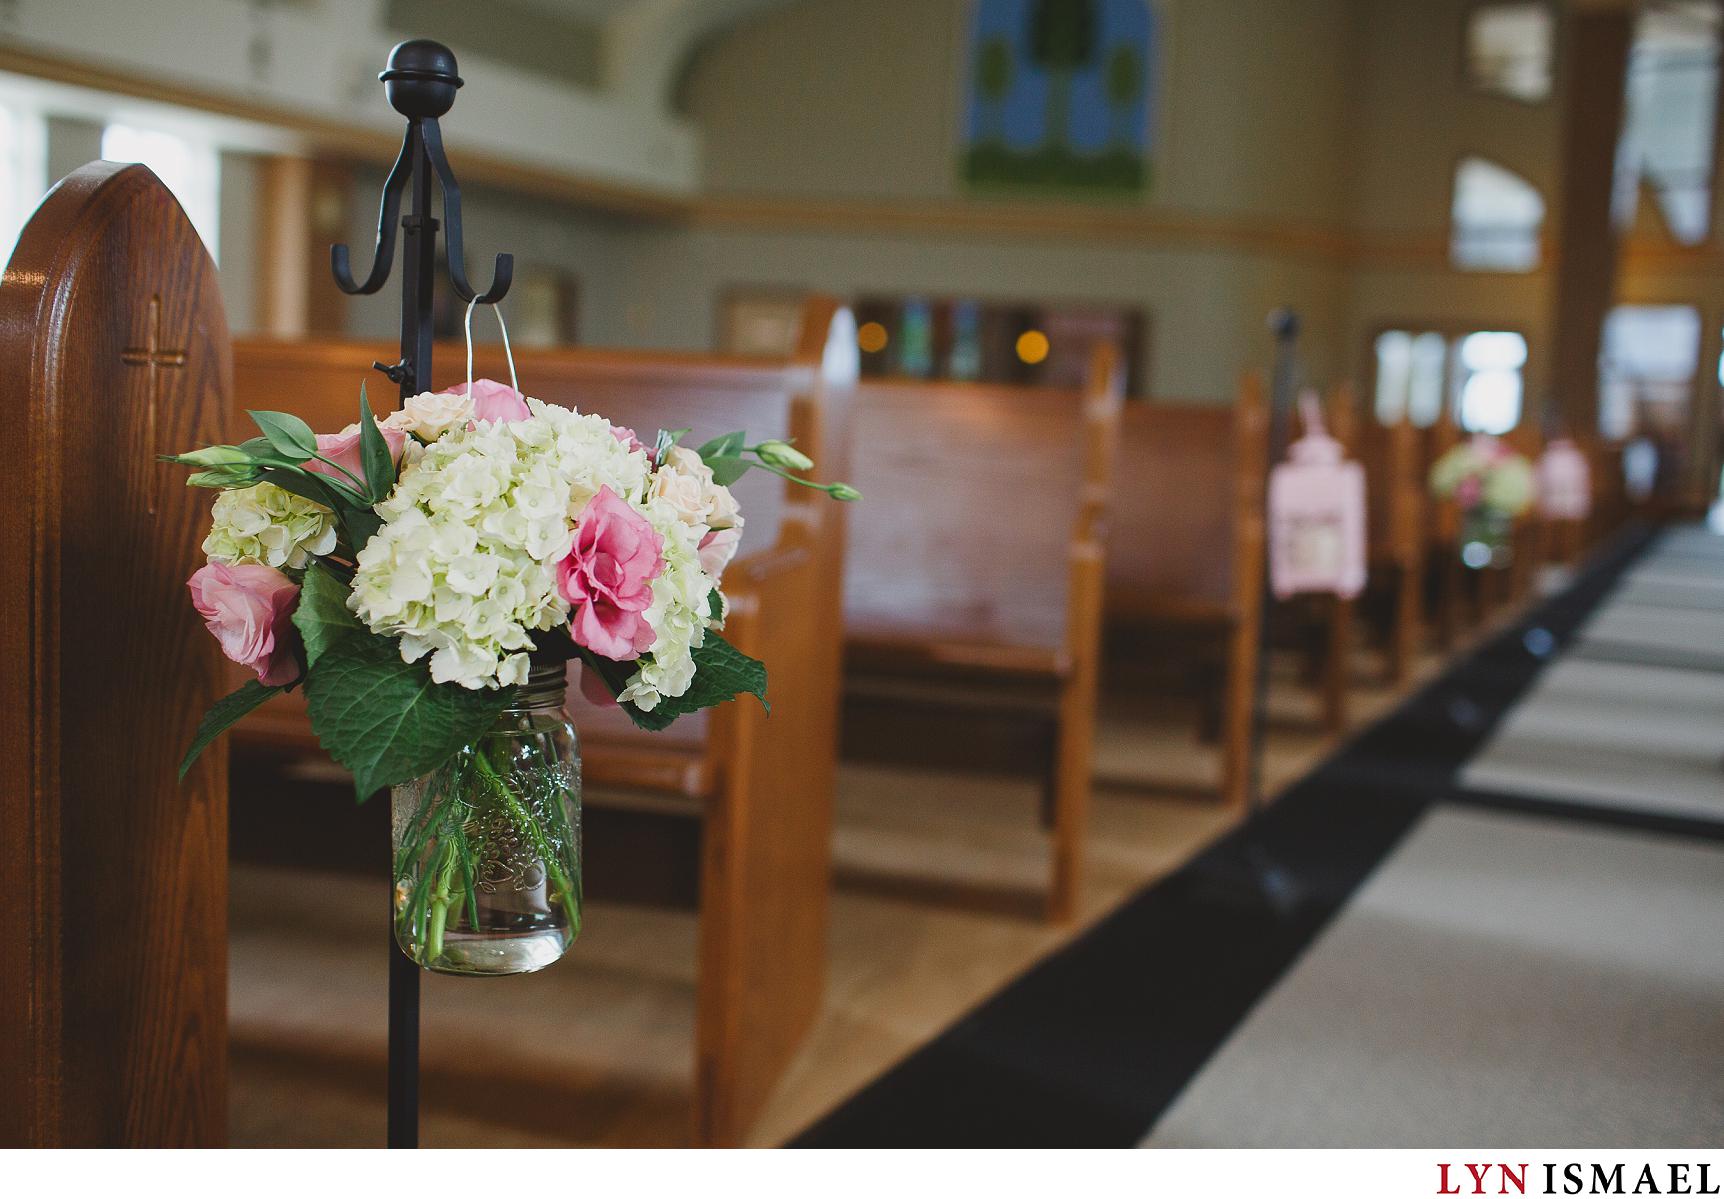 Pink flowers and green hydrangeas decorate the pews at a wedding inside Immaculate Heart Of Mary Roman Catholic Church in Stoney Creek, Ontario.